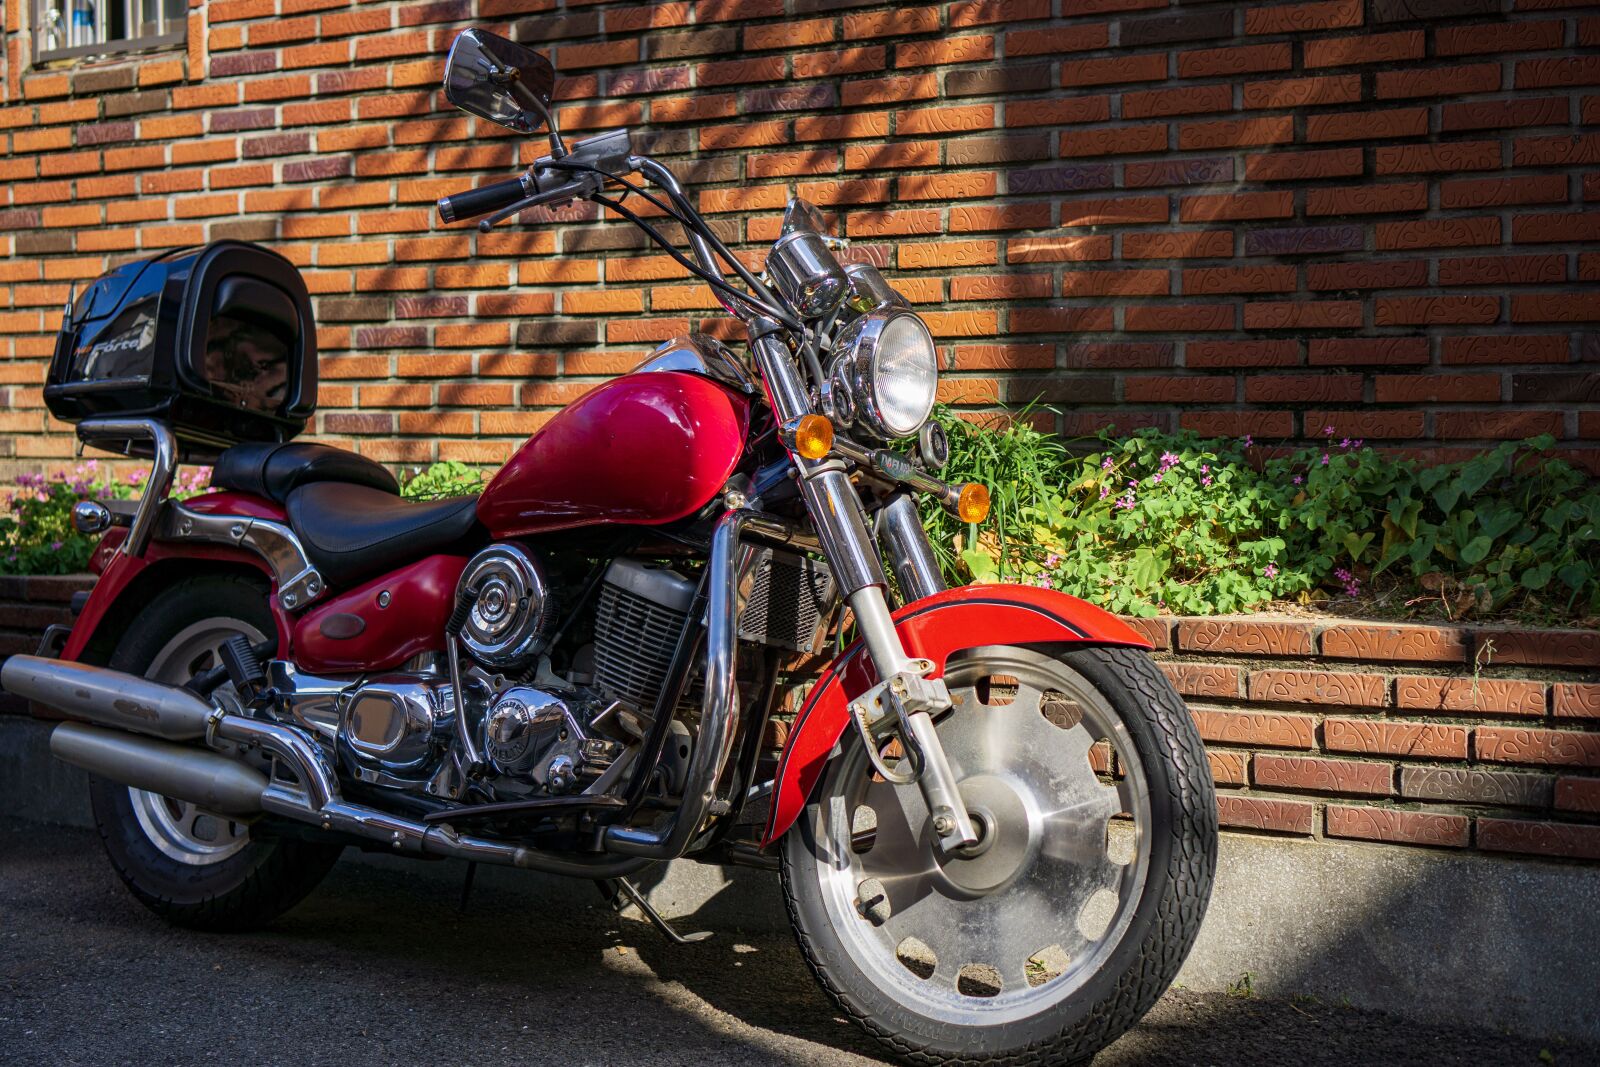 Sony a6000 sample photo. Motorcycles, alleys, red photography